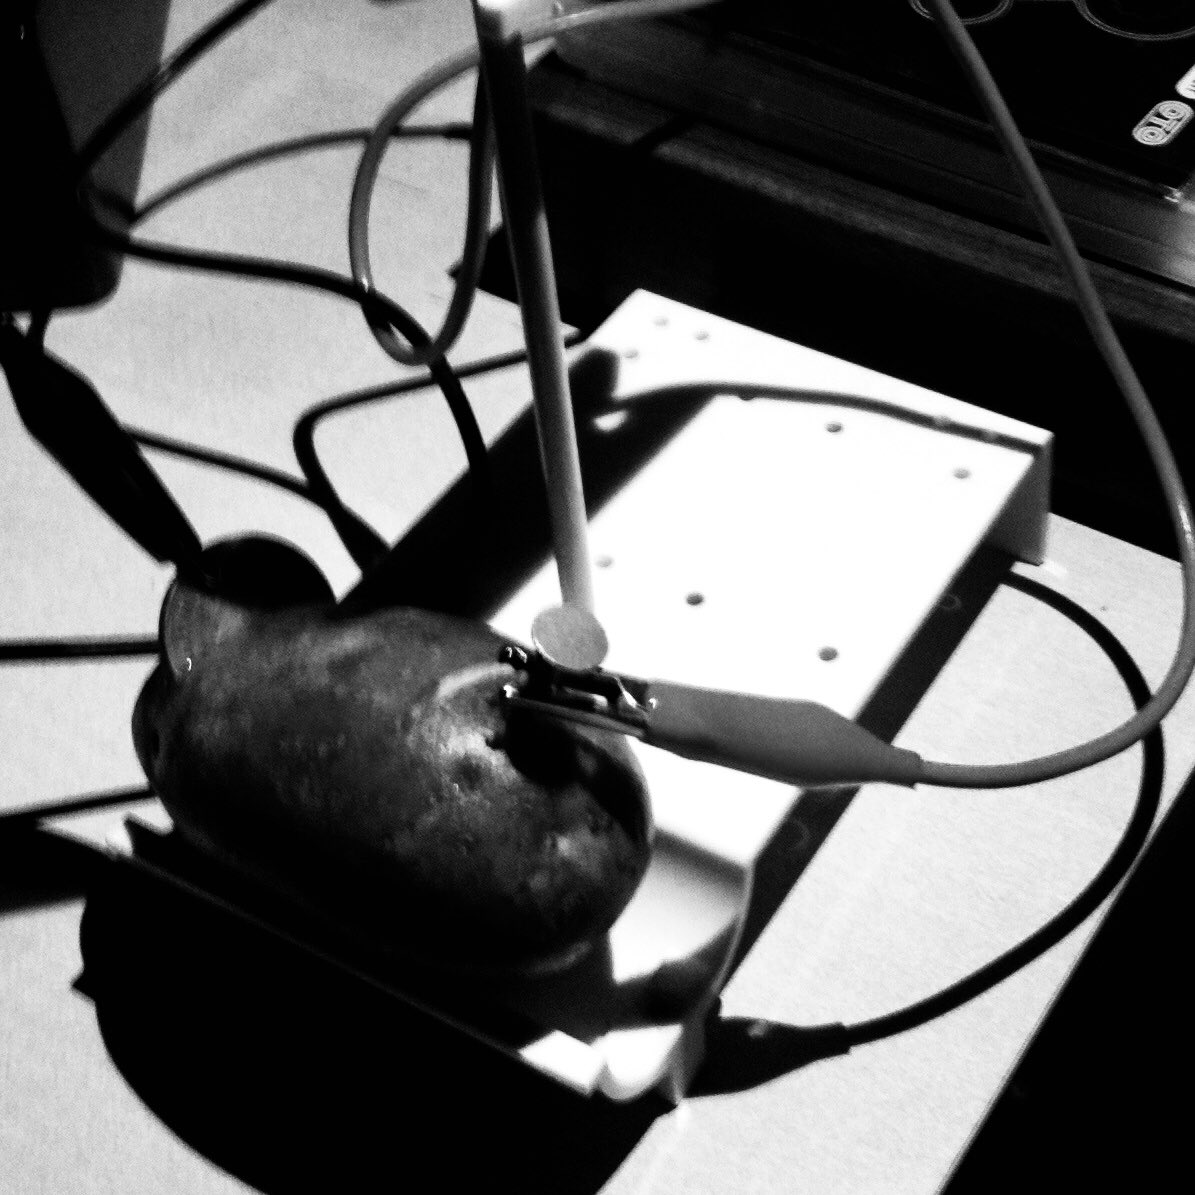 A photo from 5th September 2015. Applying electrodes to a potato, to generate electric current, to manipulate various parameters on a Buchla 200e. The result was ‘The Reactivity Series 1 - Potato’ which is on ‘Archive 1: Ambience’. Released on Friday! cafekaput.Bandcamp.com